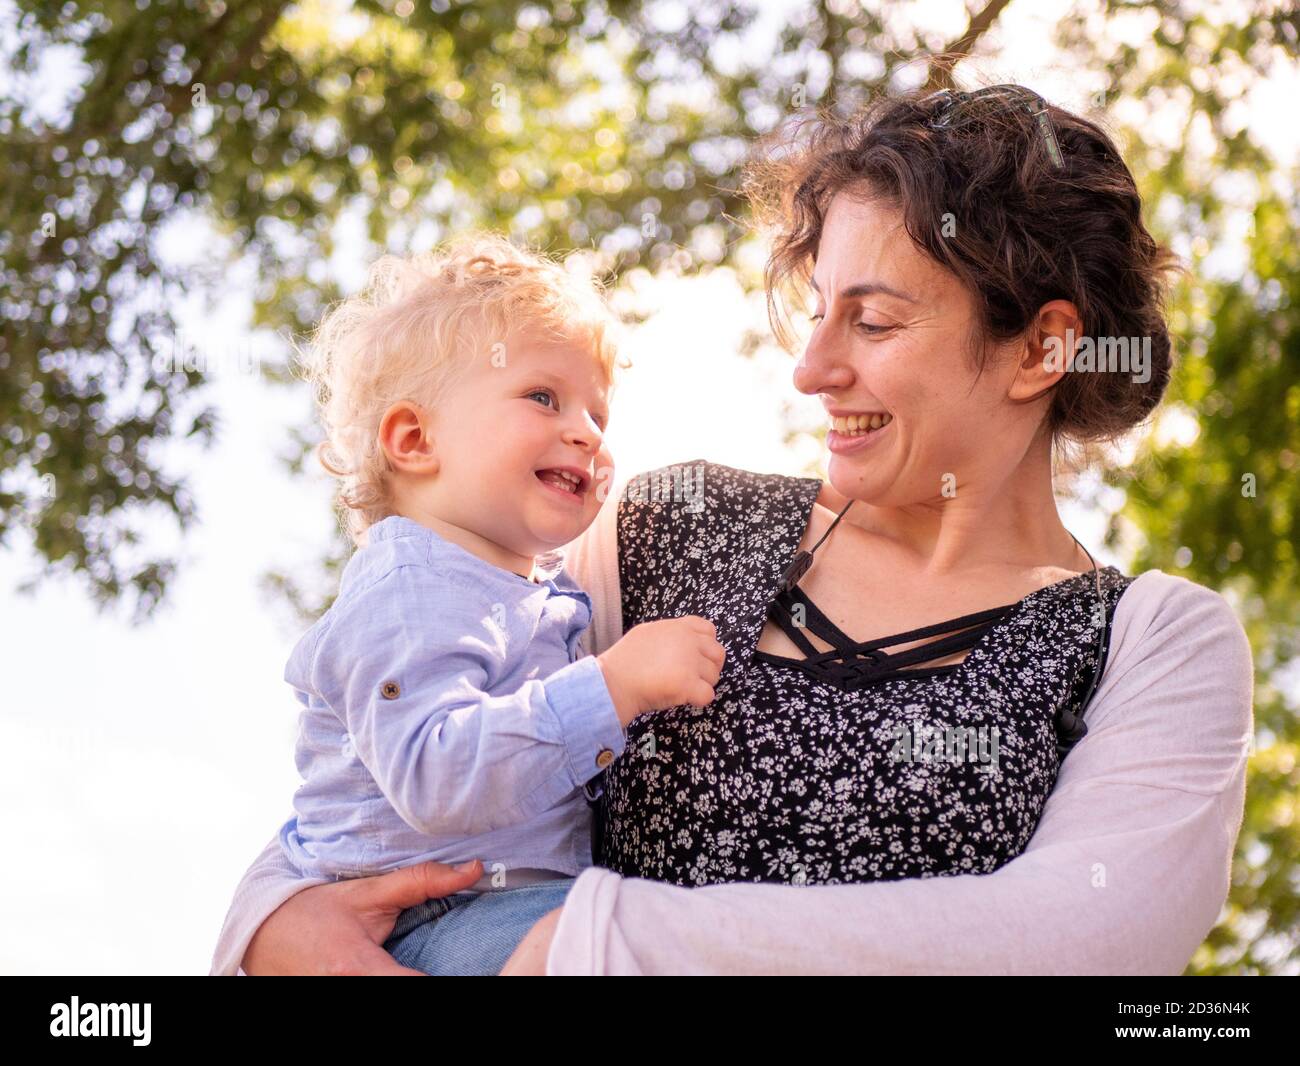 Proud and happy mother smiling and showing her love for her one year old infant baby boy held in her arms outdoors Stock Photo